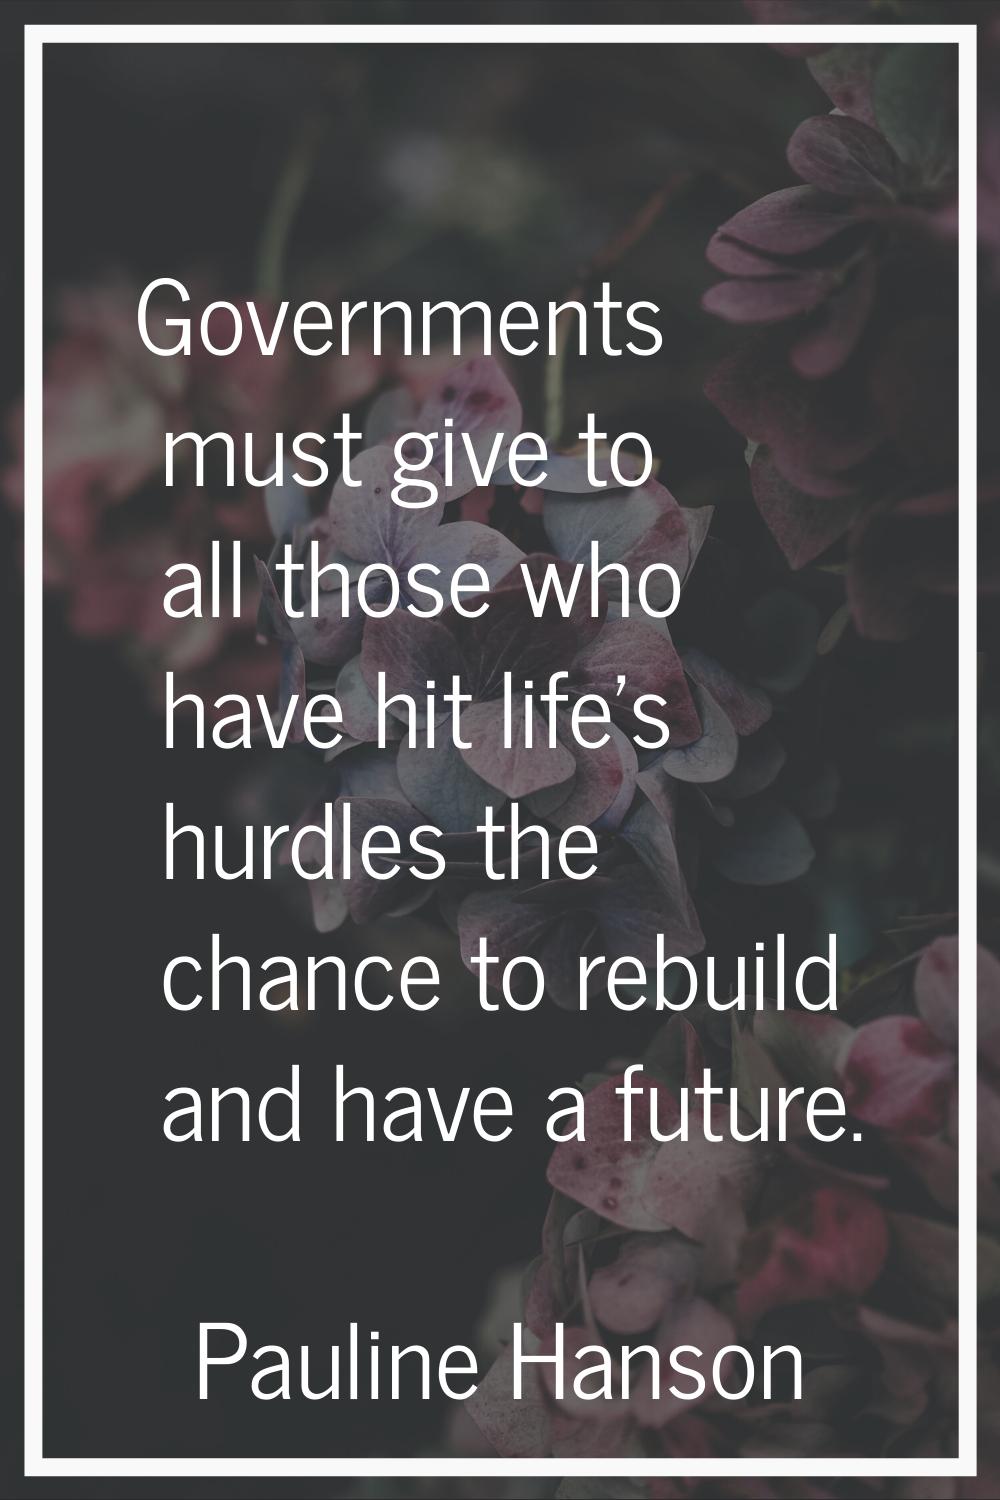 Governments must give to all those who have hit life's hurdles the chance to rebuild and have a fut